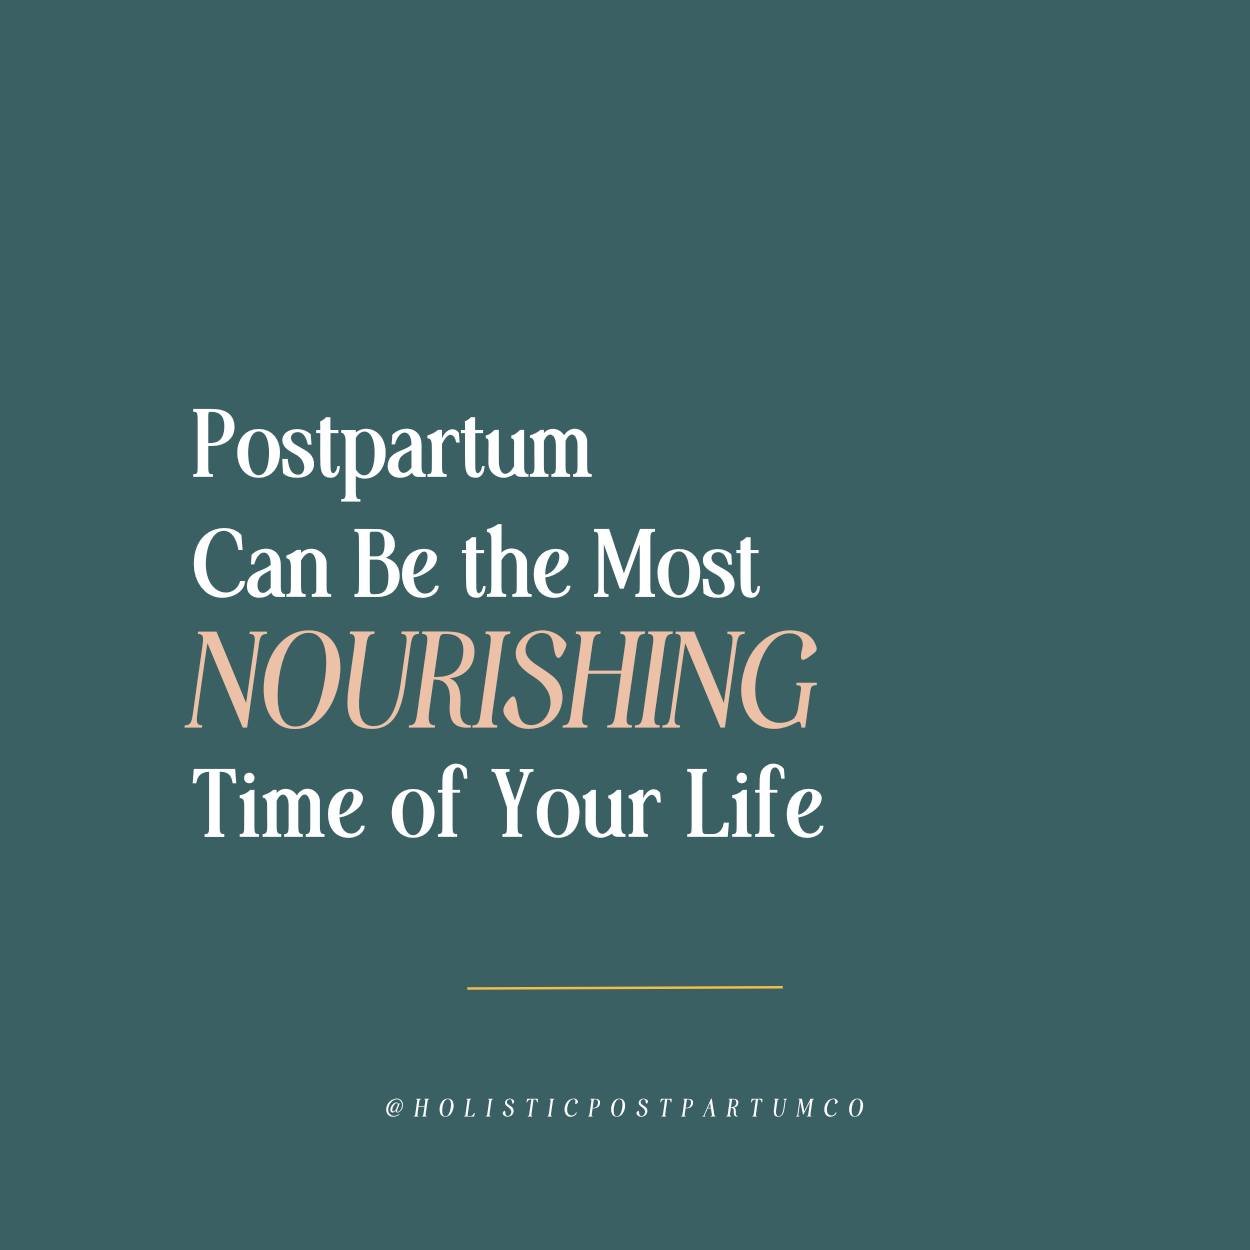 Why does the word &ldquo;postpartum&rdquo; always make so many people think of depression? 😒

&zwnj;

Unfortunately, depression can be a reality for some postpartum women, especially with the isolation, stress, and depletion that so often occurs, bu